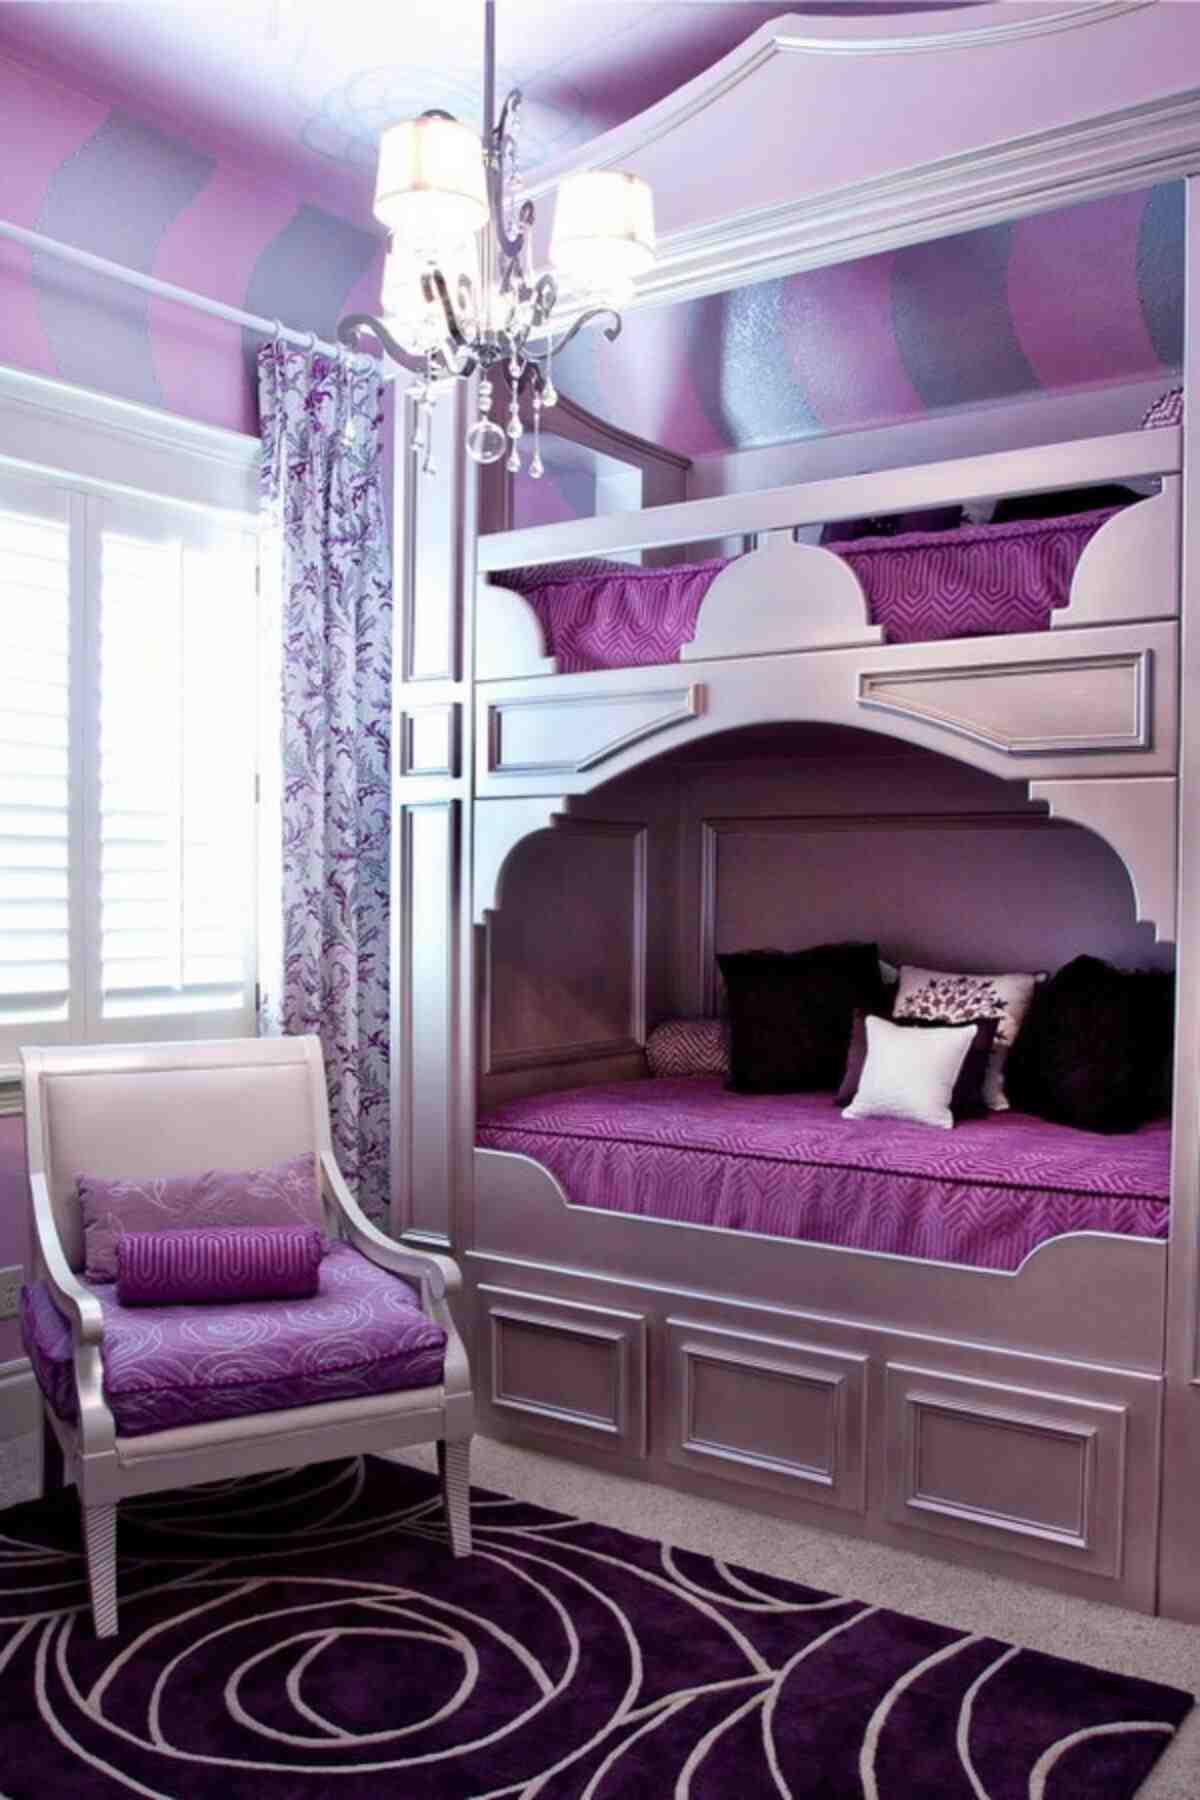 Cool Bunk Beds The Best Kids Room, Bunk Beds For Teenage Girl